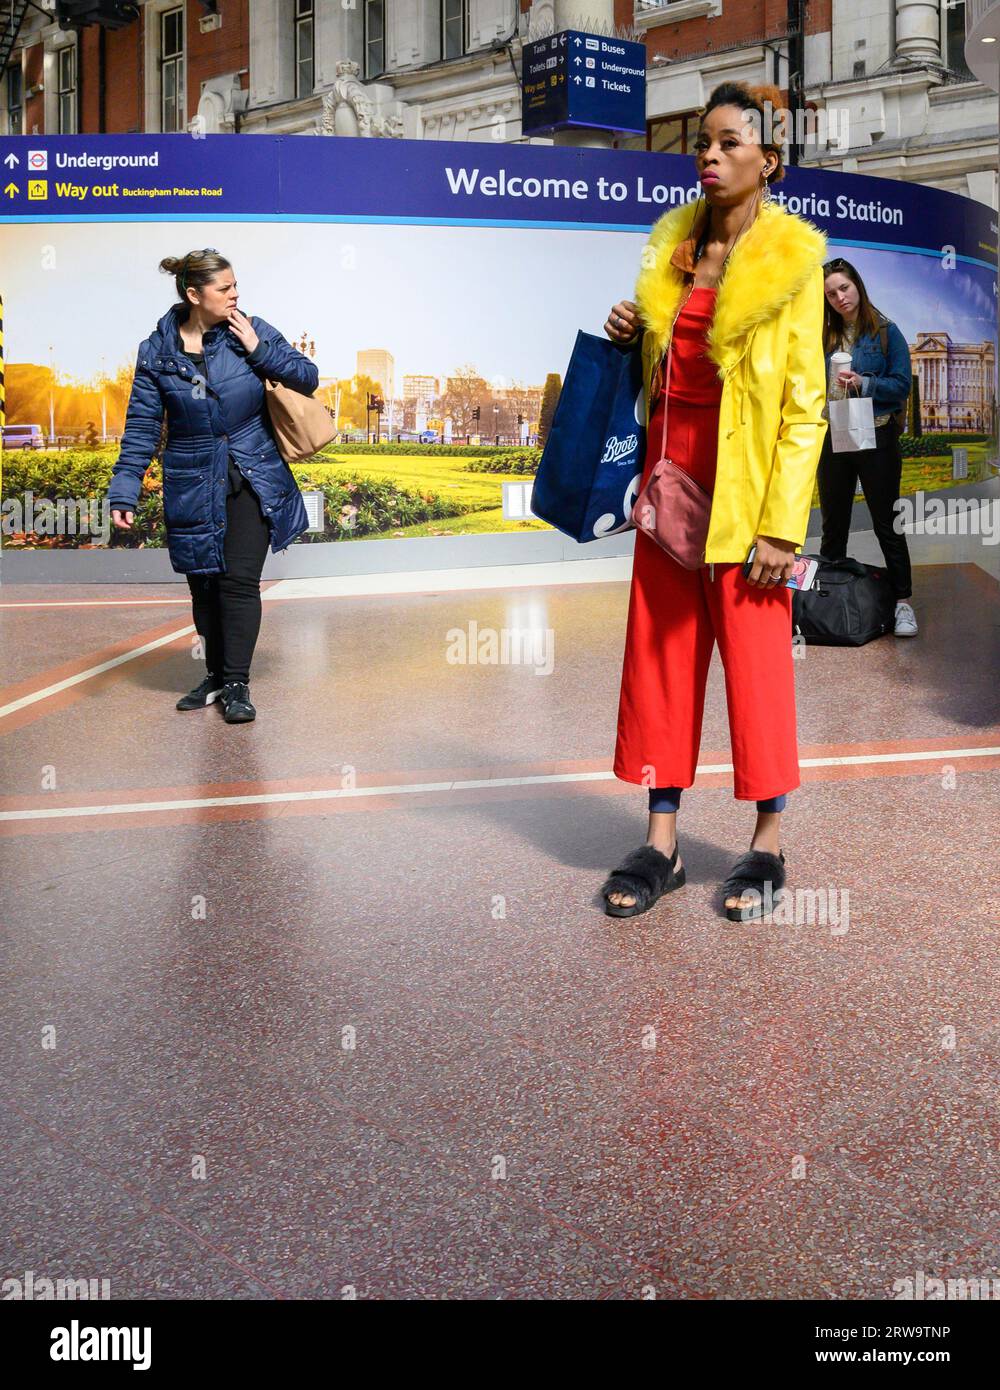 London, England, UK. Woman dressed in bright colours on the concourse of Victoria Station Stock Photo